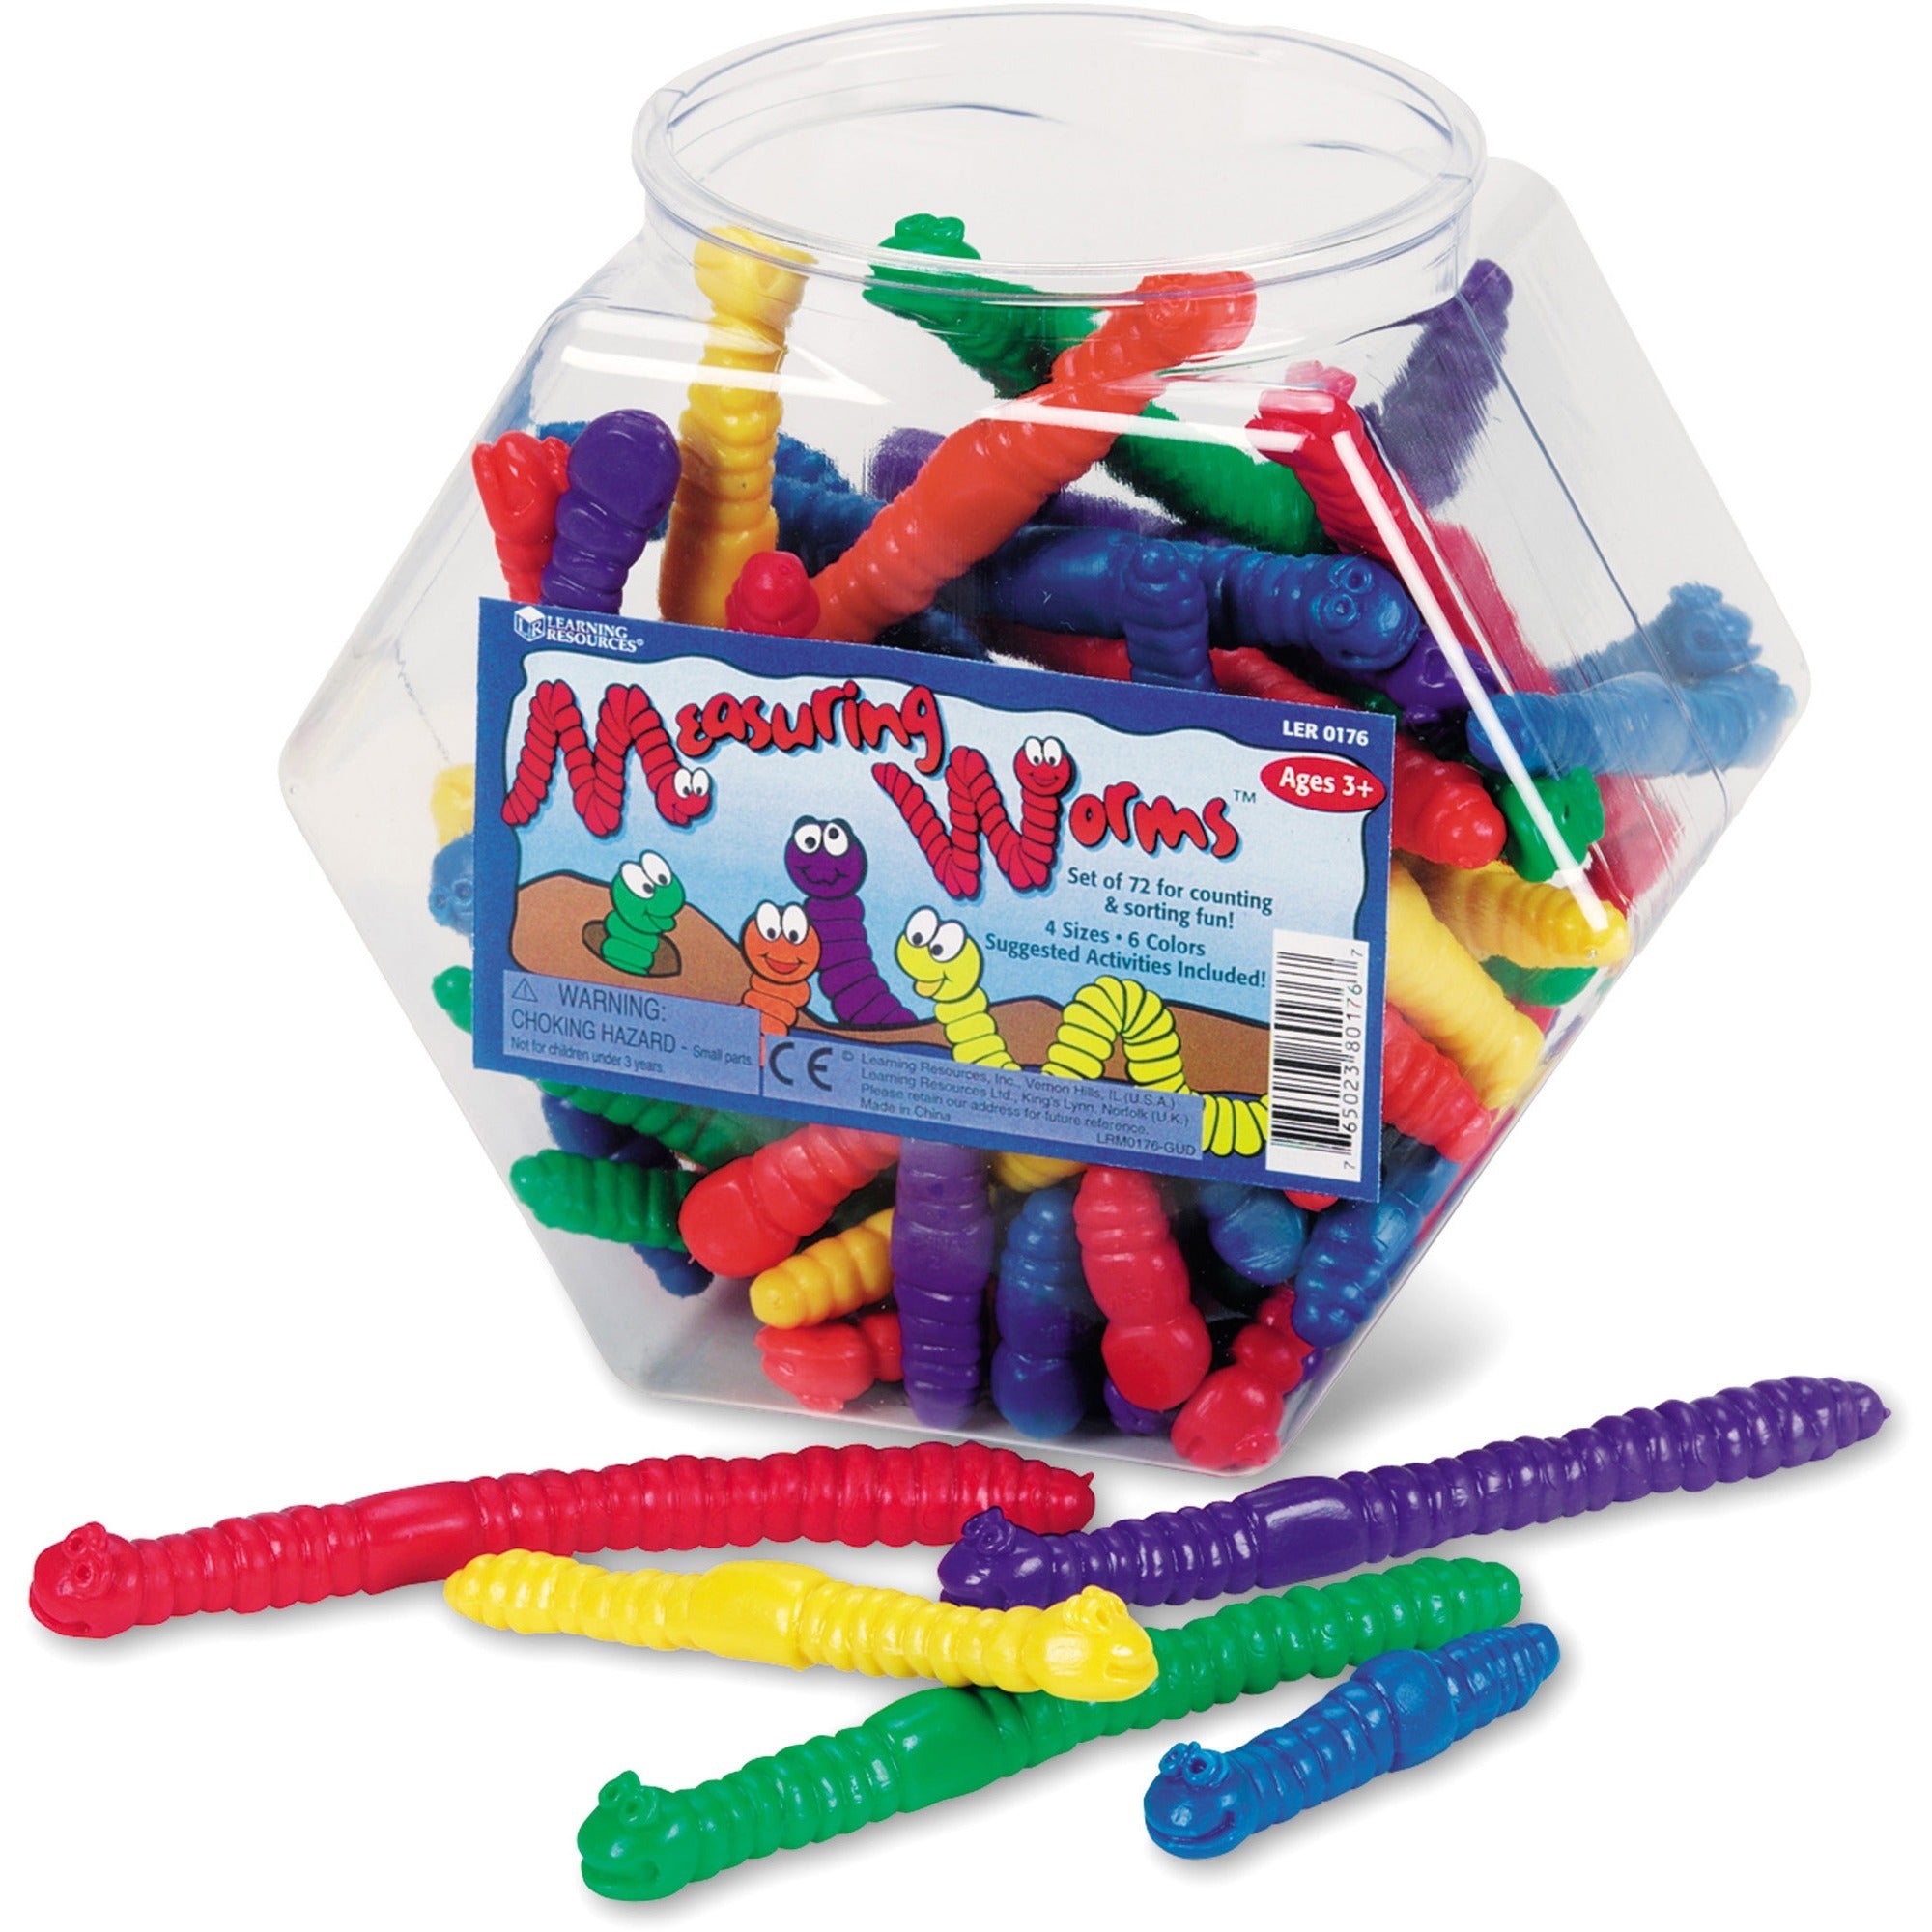 Learning Resources Measuring Worms - Skill Learning: Measurement, Mathematics, Counting, Sorting - 3 Year & Up - Multi - 